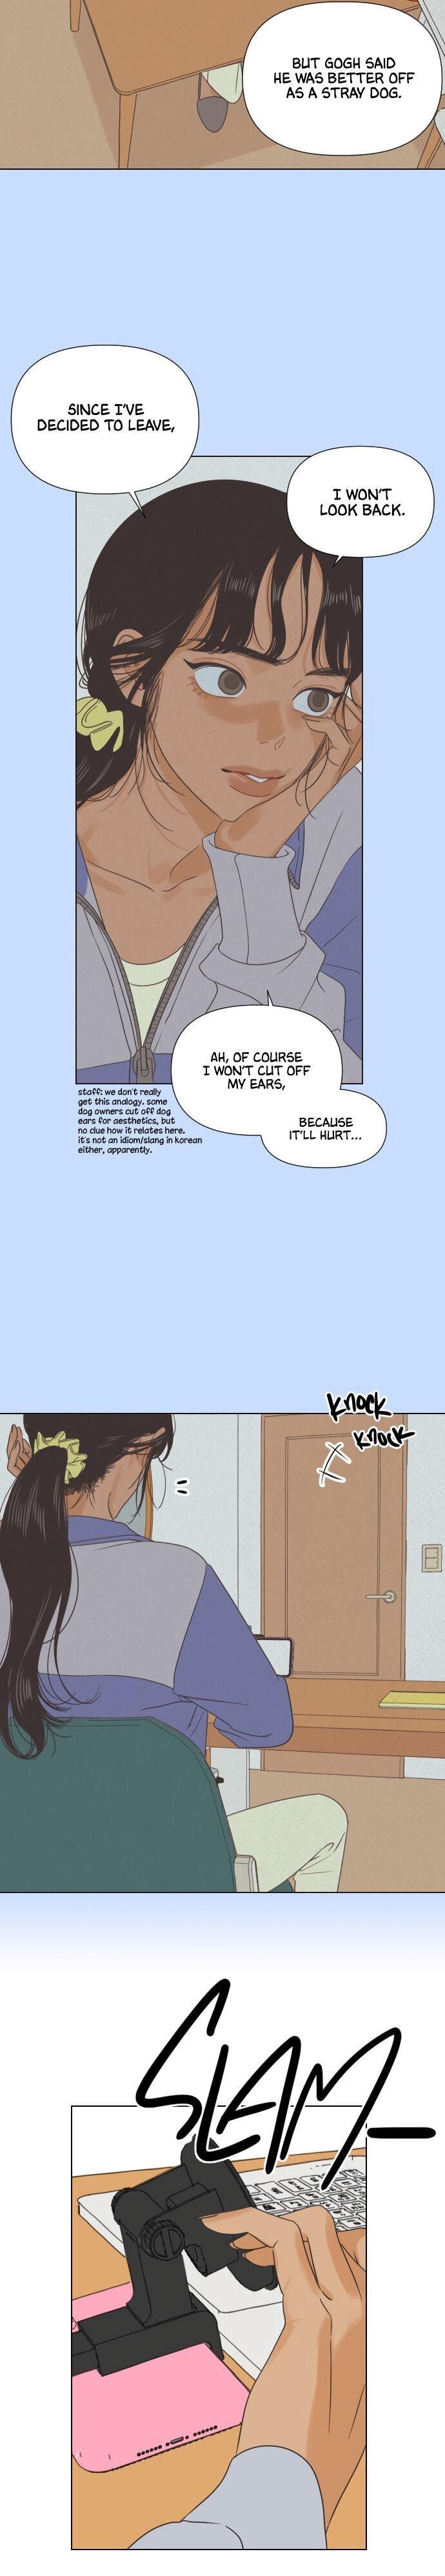 The World They're Dating In - Page 4